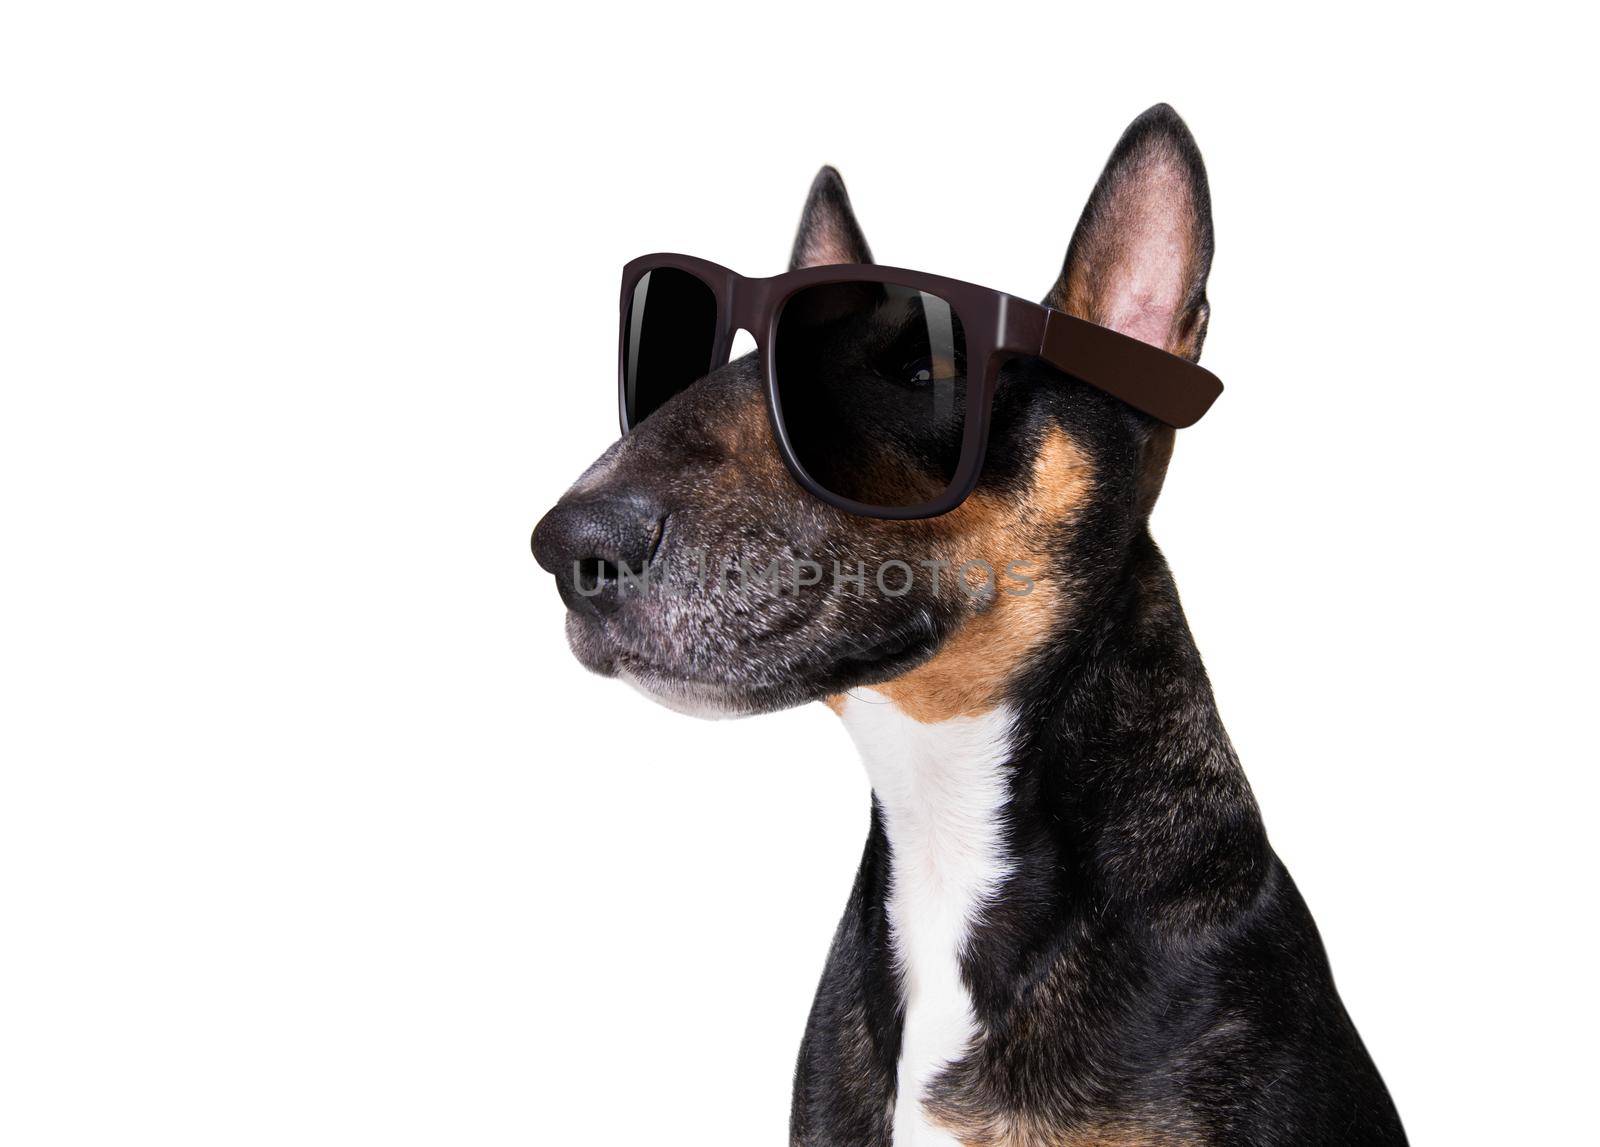 bull terrier   dog with cool attitude isolated on white background wearing fancy sunglasses